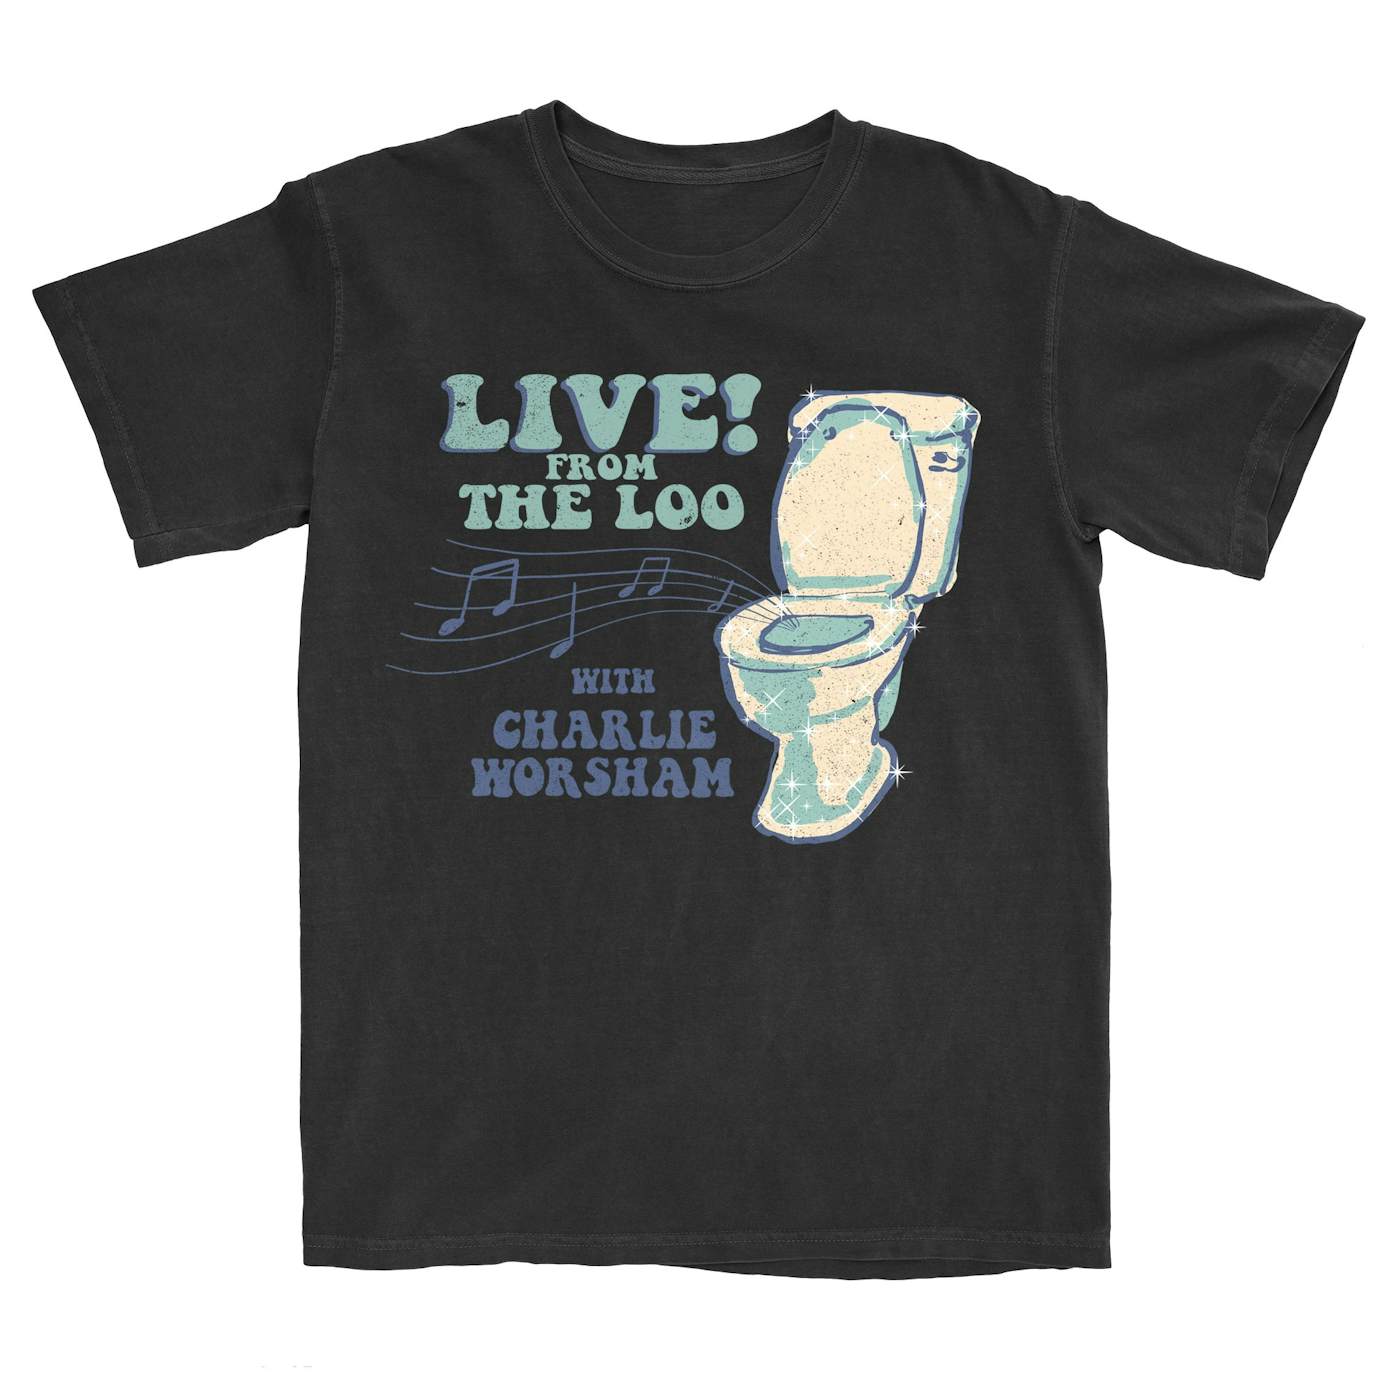 Charlie Worsham LIVE! From the Loo T-Shirt